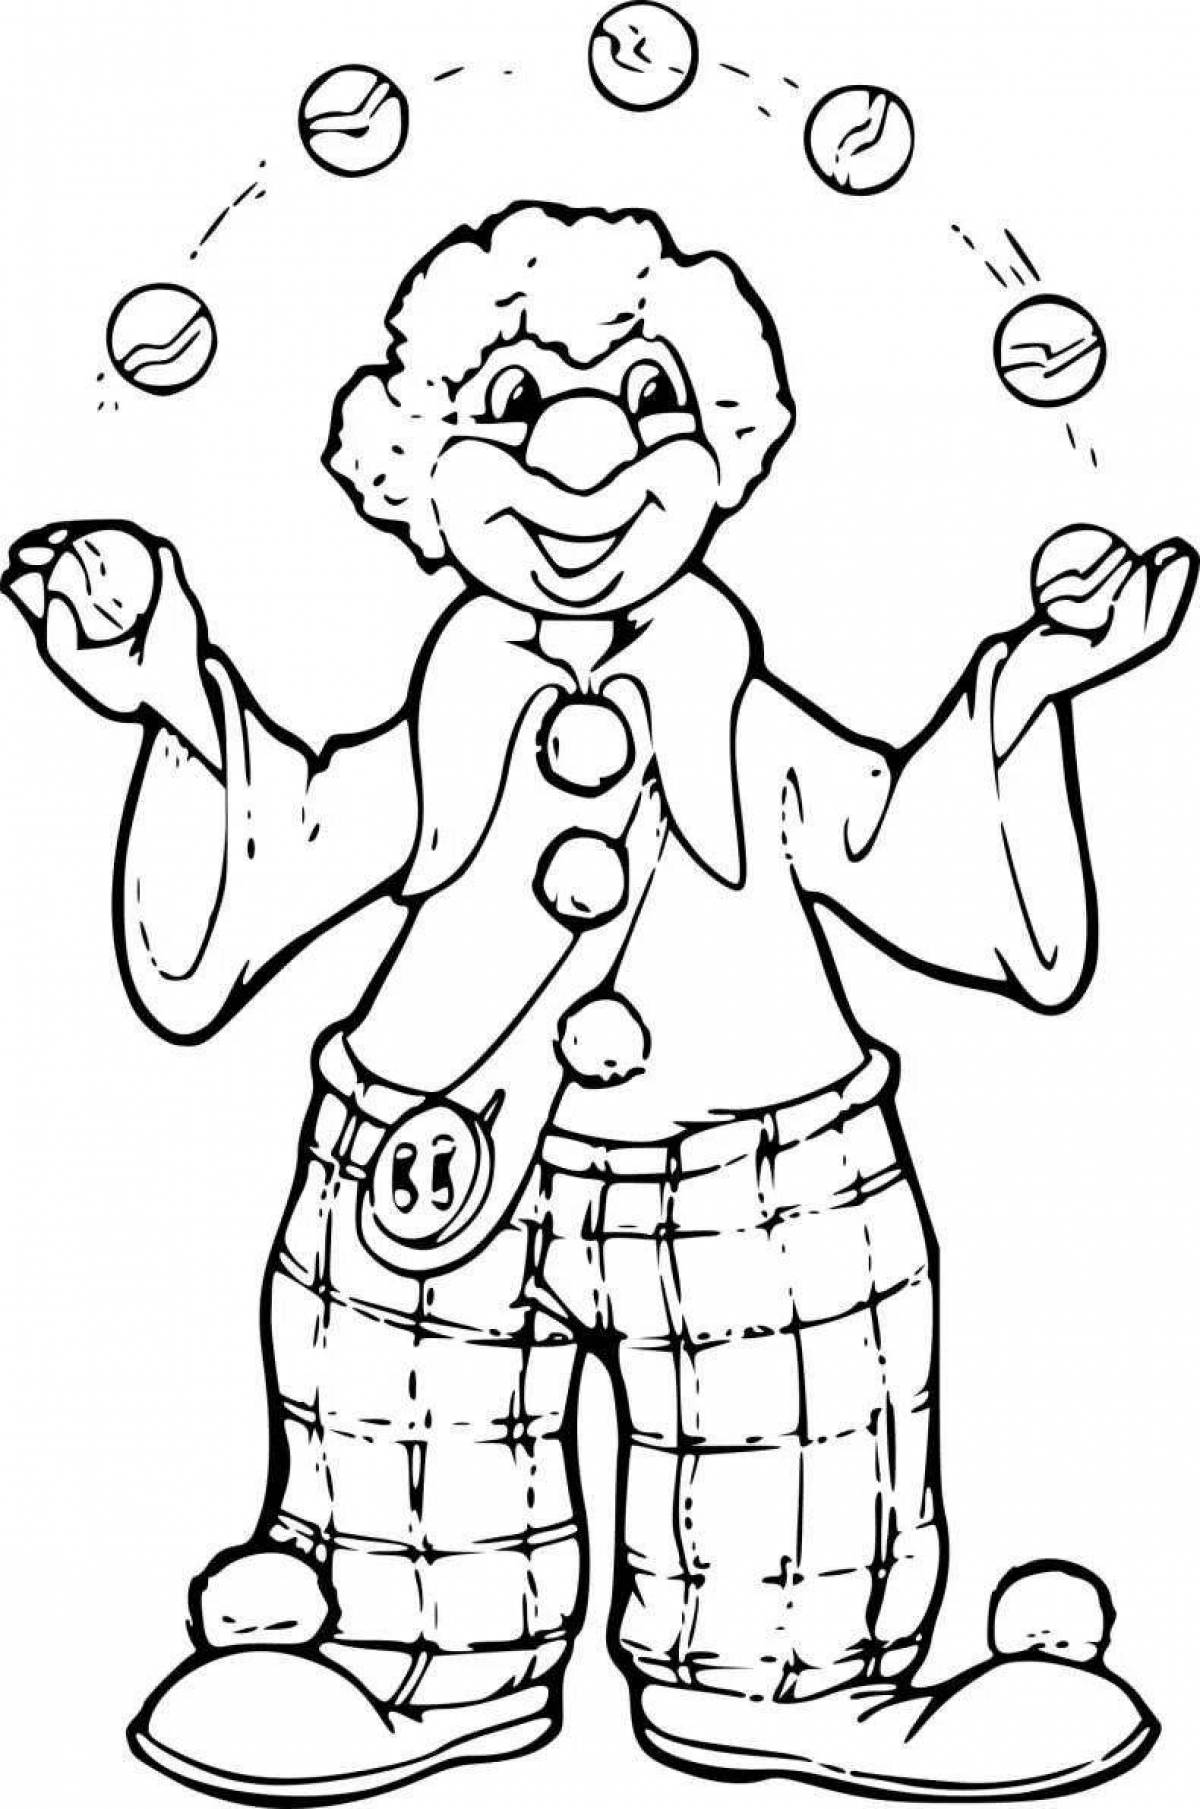 Creative clown coloring for kids